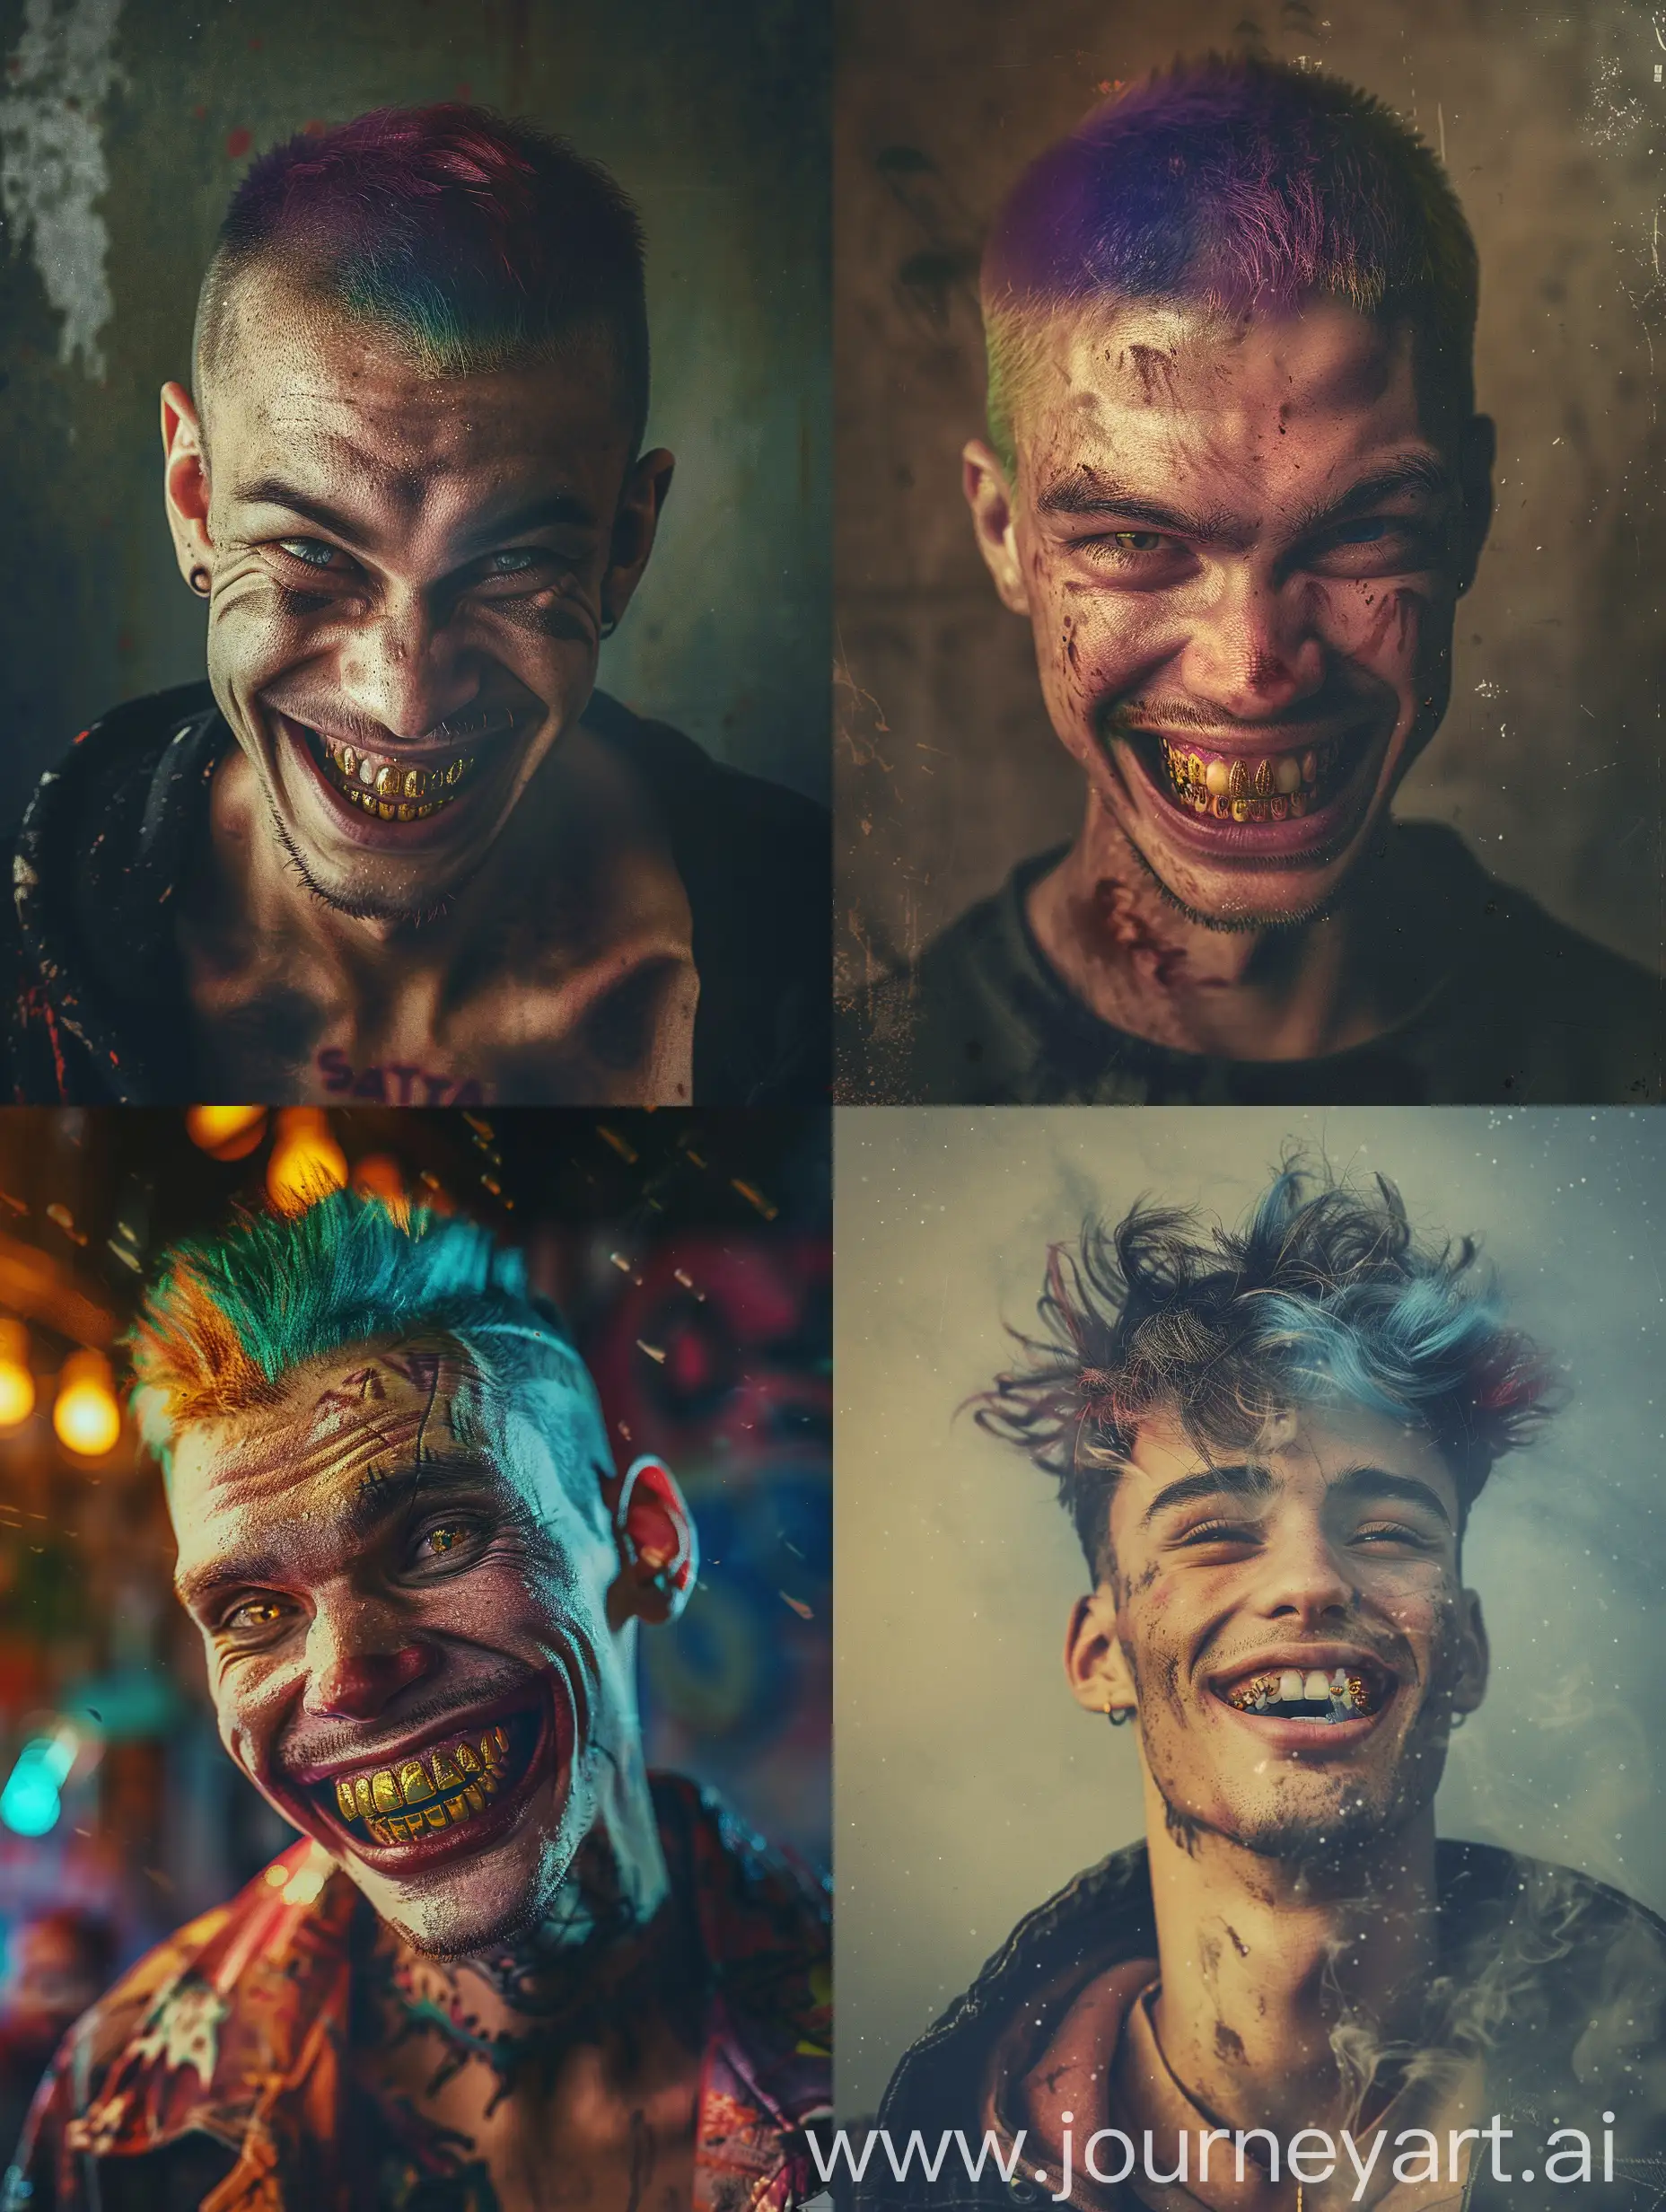 made a realistic photo high quality texture of a man with colored short hair with a face comic and happy alternative style gold teeth smiling drama film lut camera hazer blur